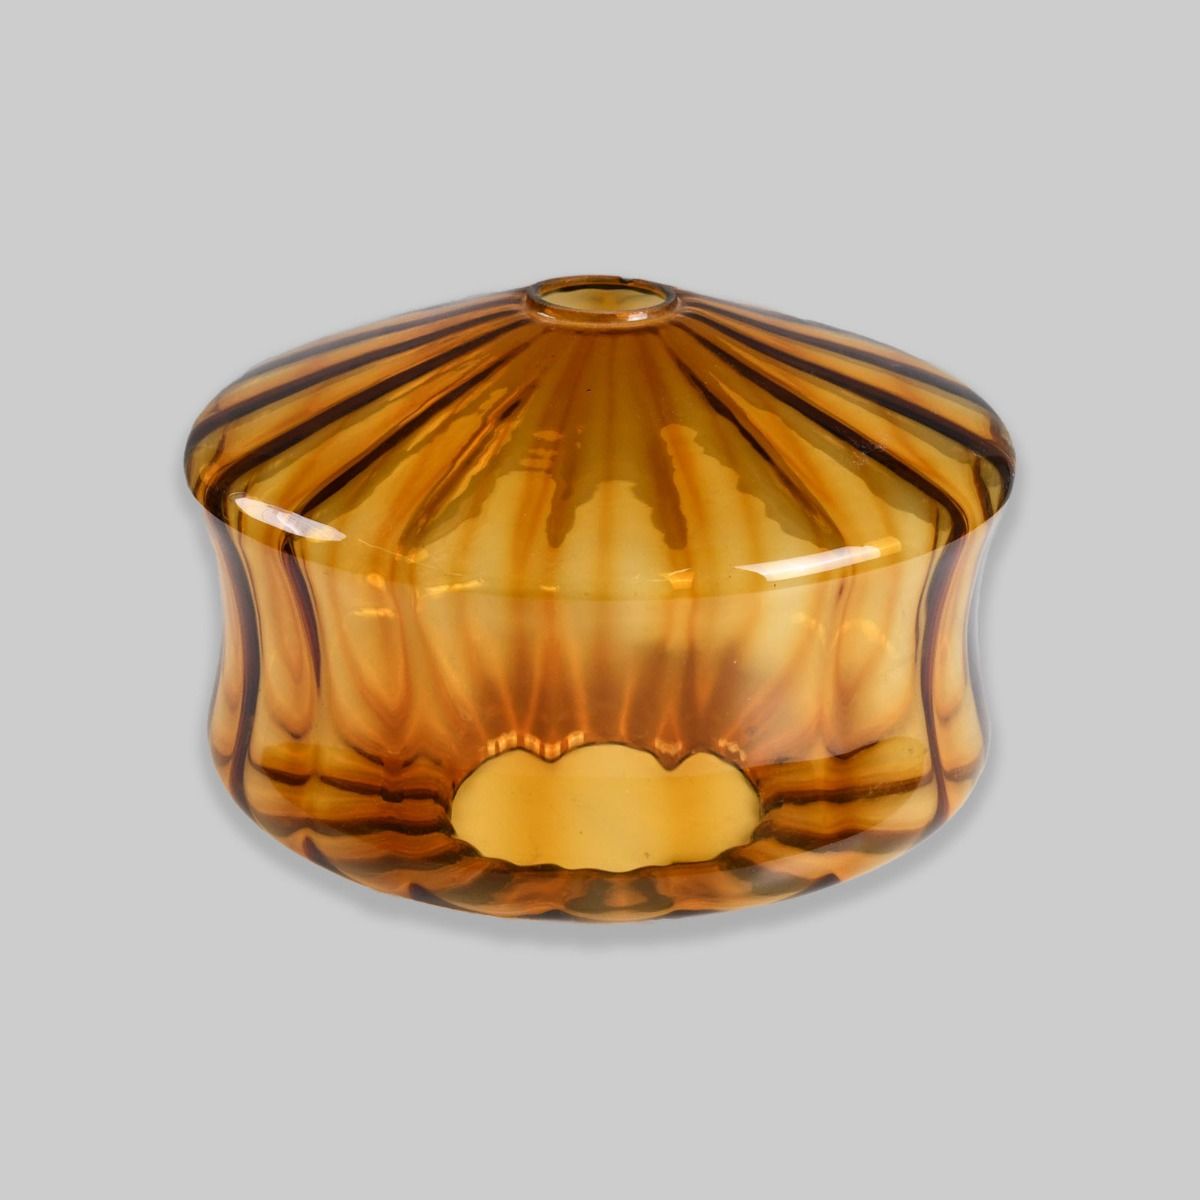 Vintage 1960s Amber Glass Pendant Lamp Shade